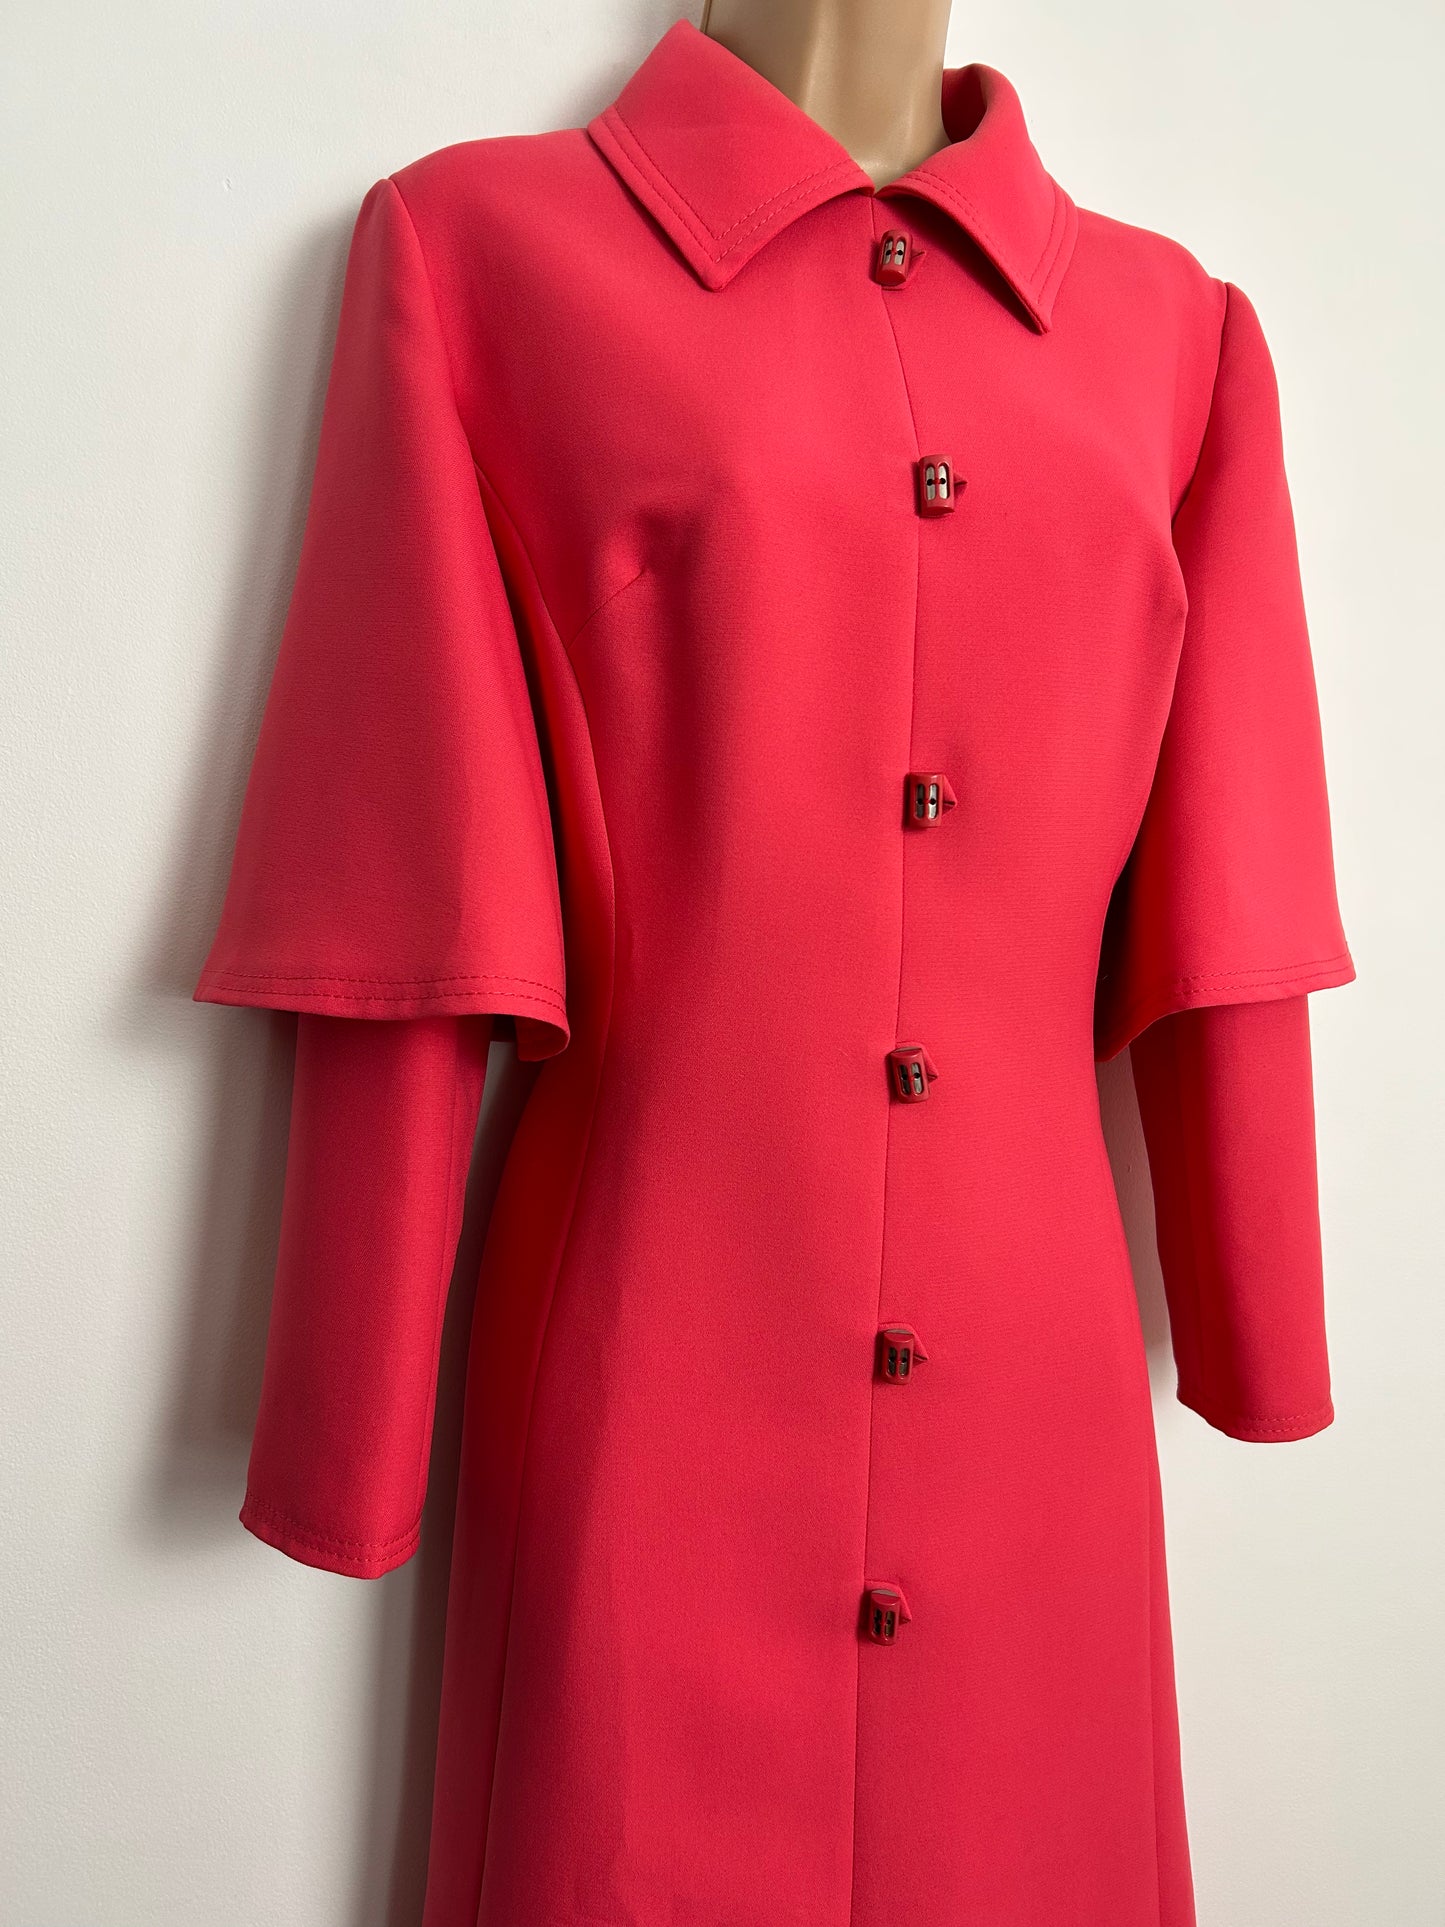 Vintage 1960s UK Size 12 PEGGY FRENCH COUTURE Coral Pink Layered Sleeve Shift Dress